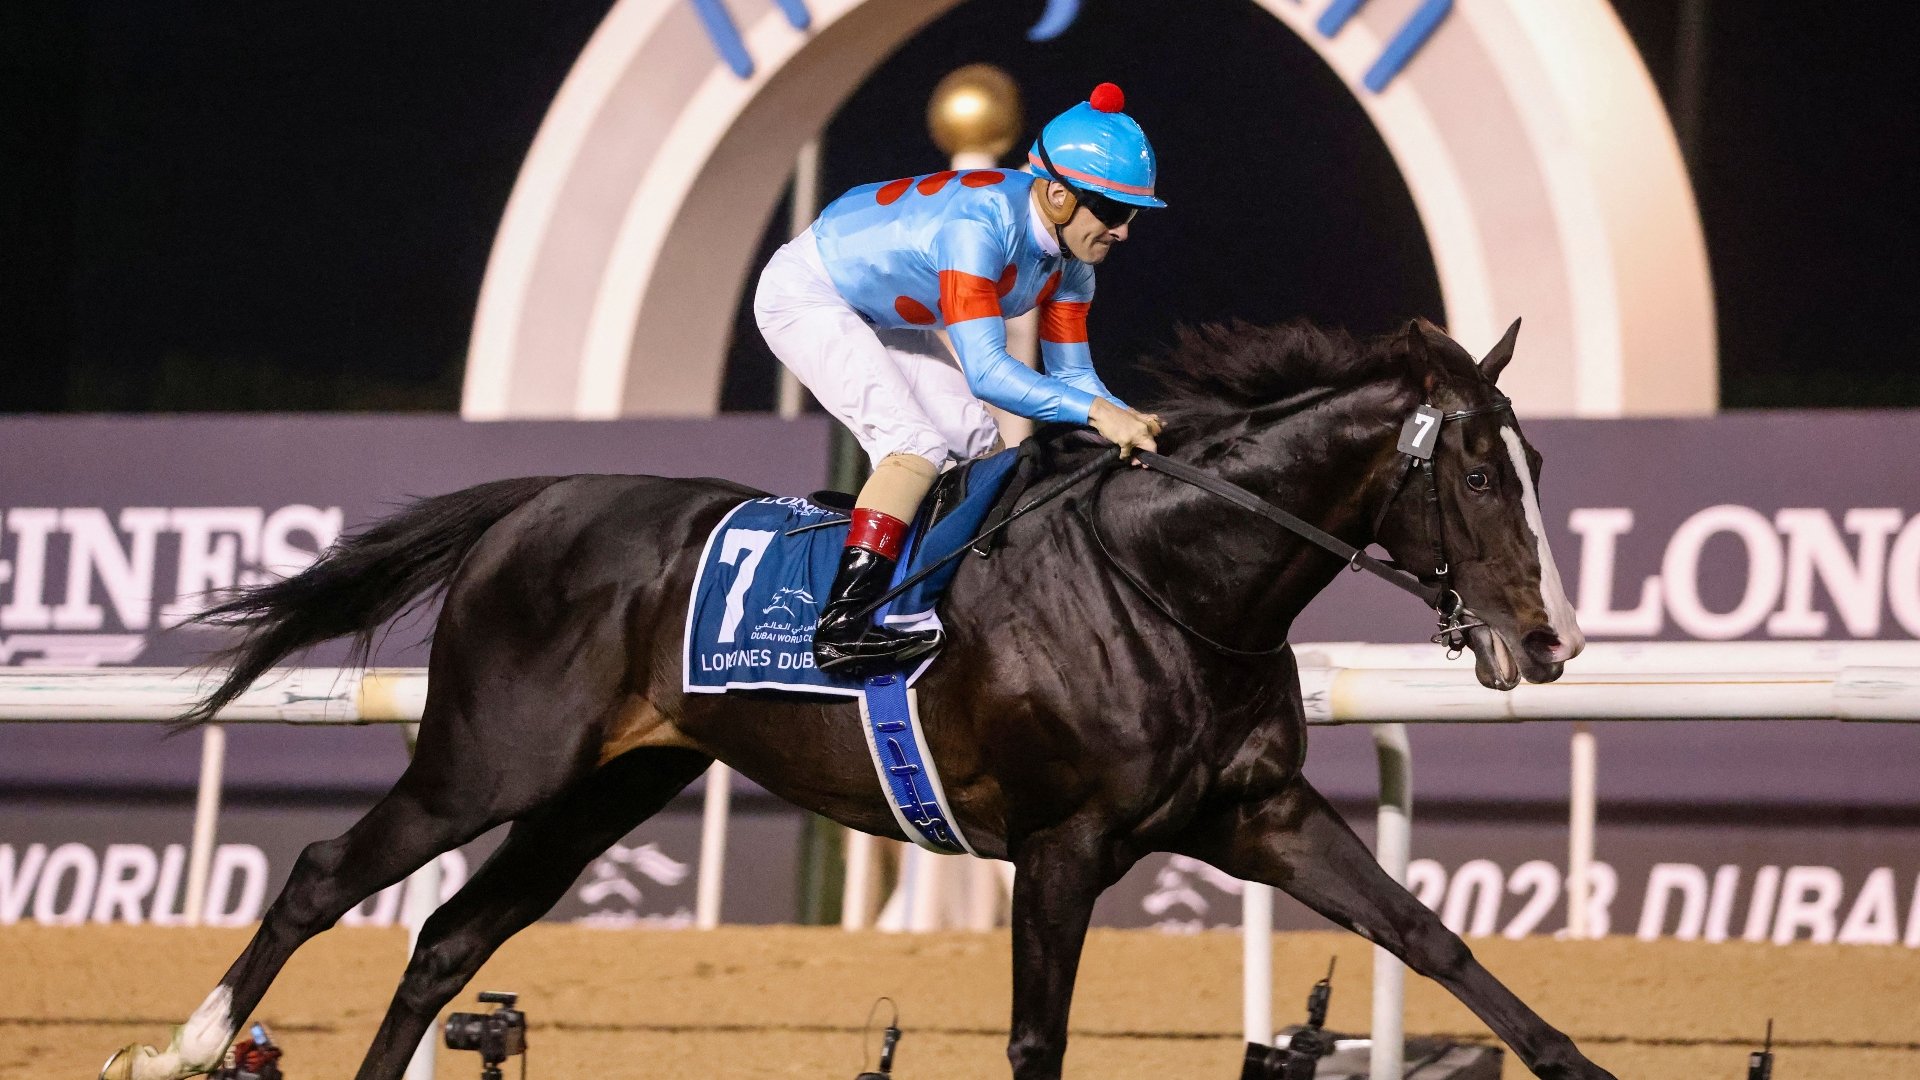 Dubai World Cup Night at Meydan (Pictures and Results)